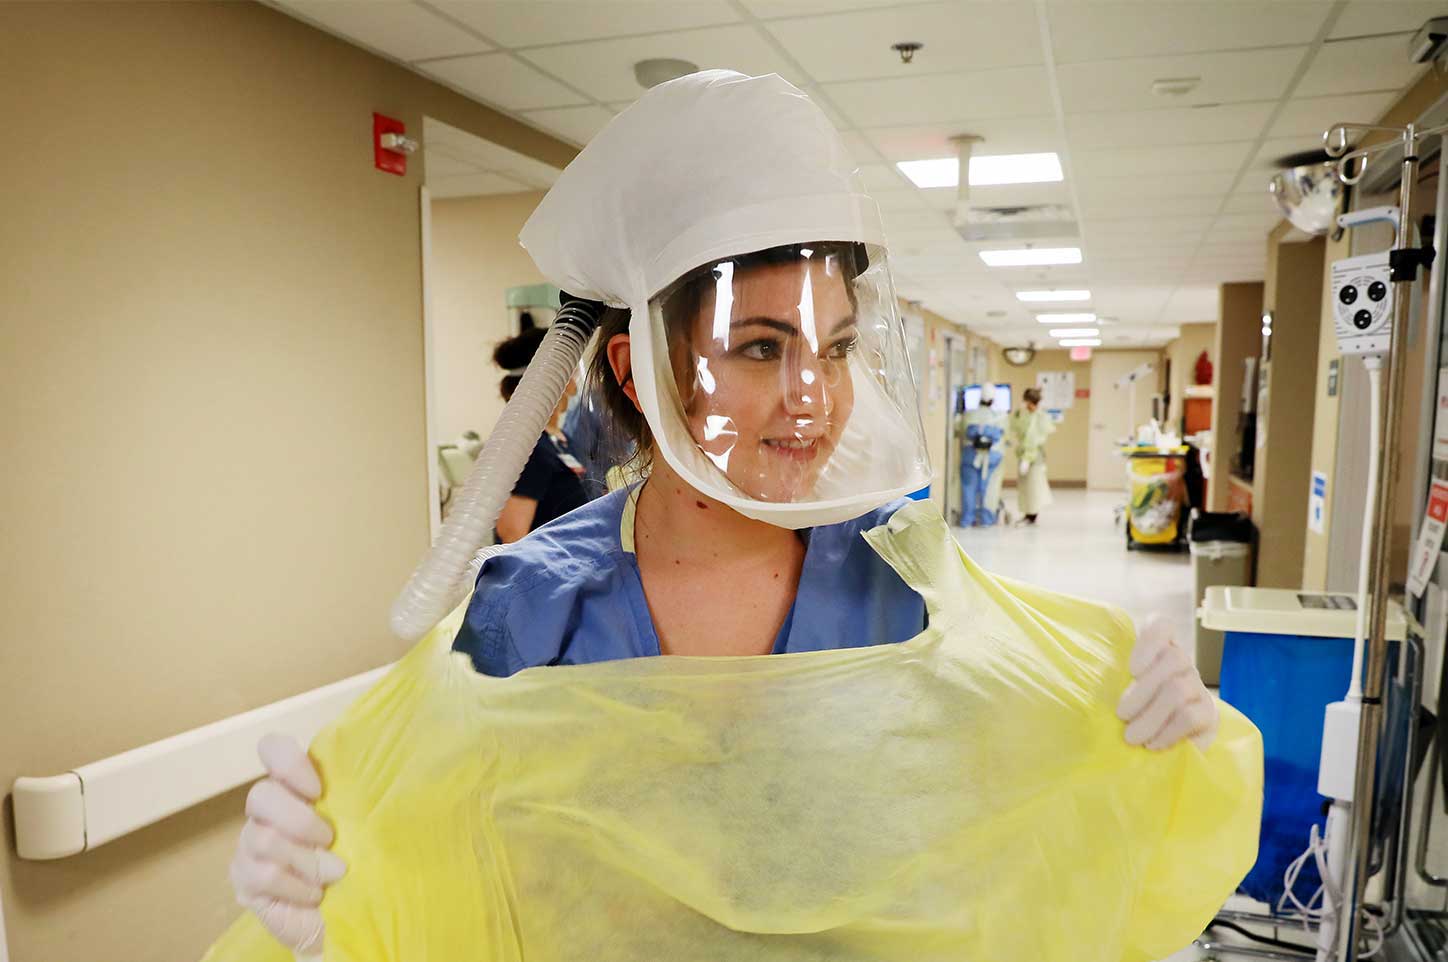 A frontline worker wearing full scrubs and face shield takes off a disposable hospital gown in a busy hallway.